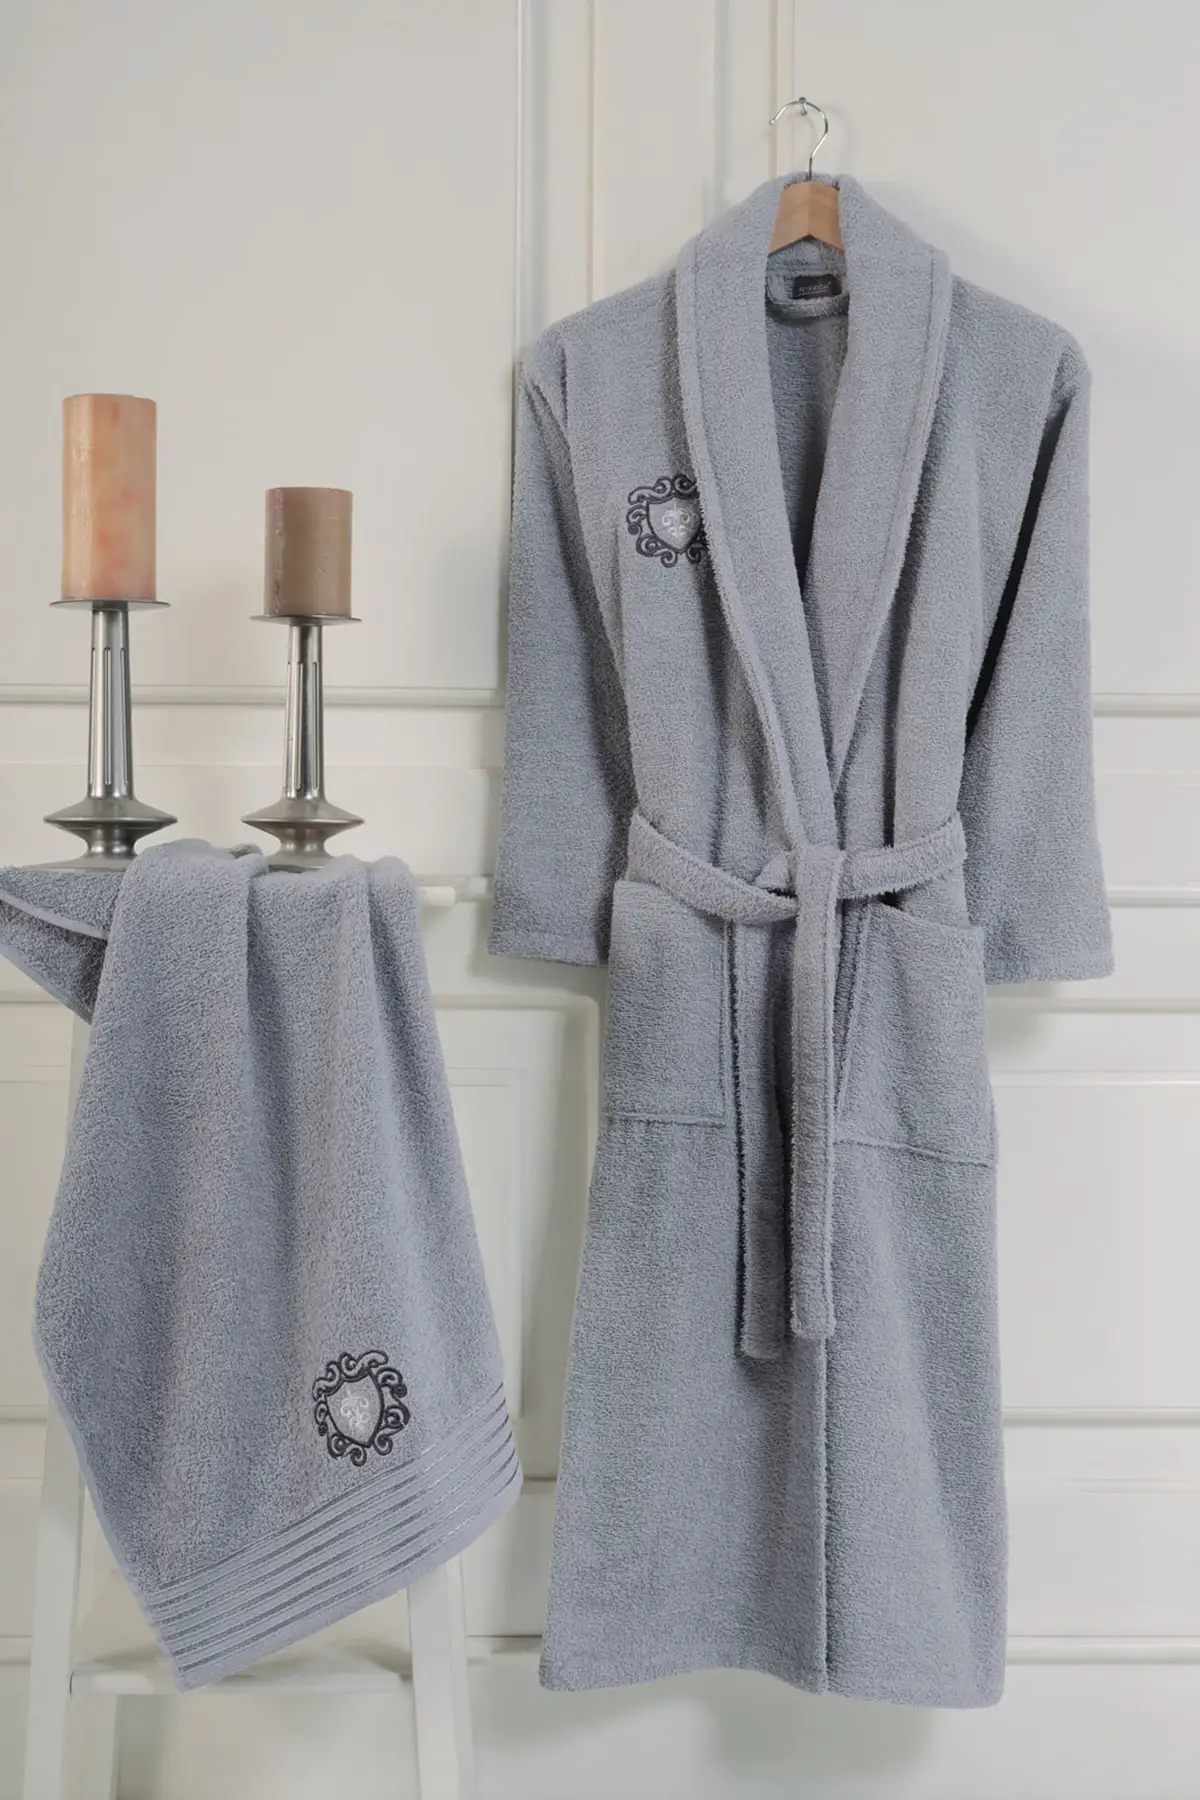 

100% Cotton Long Thick Terry Towel Set Bathrobe For Bath Soft Relax Dressing Gown Bridesmaid Robes Absorbent Femme Dressing